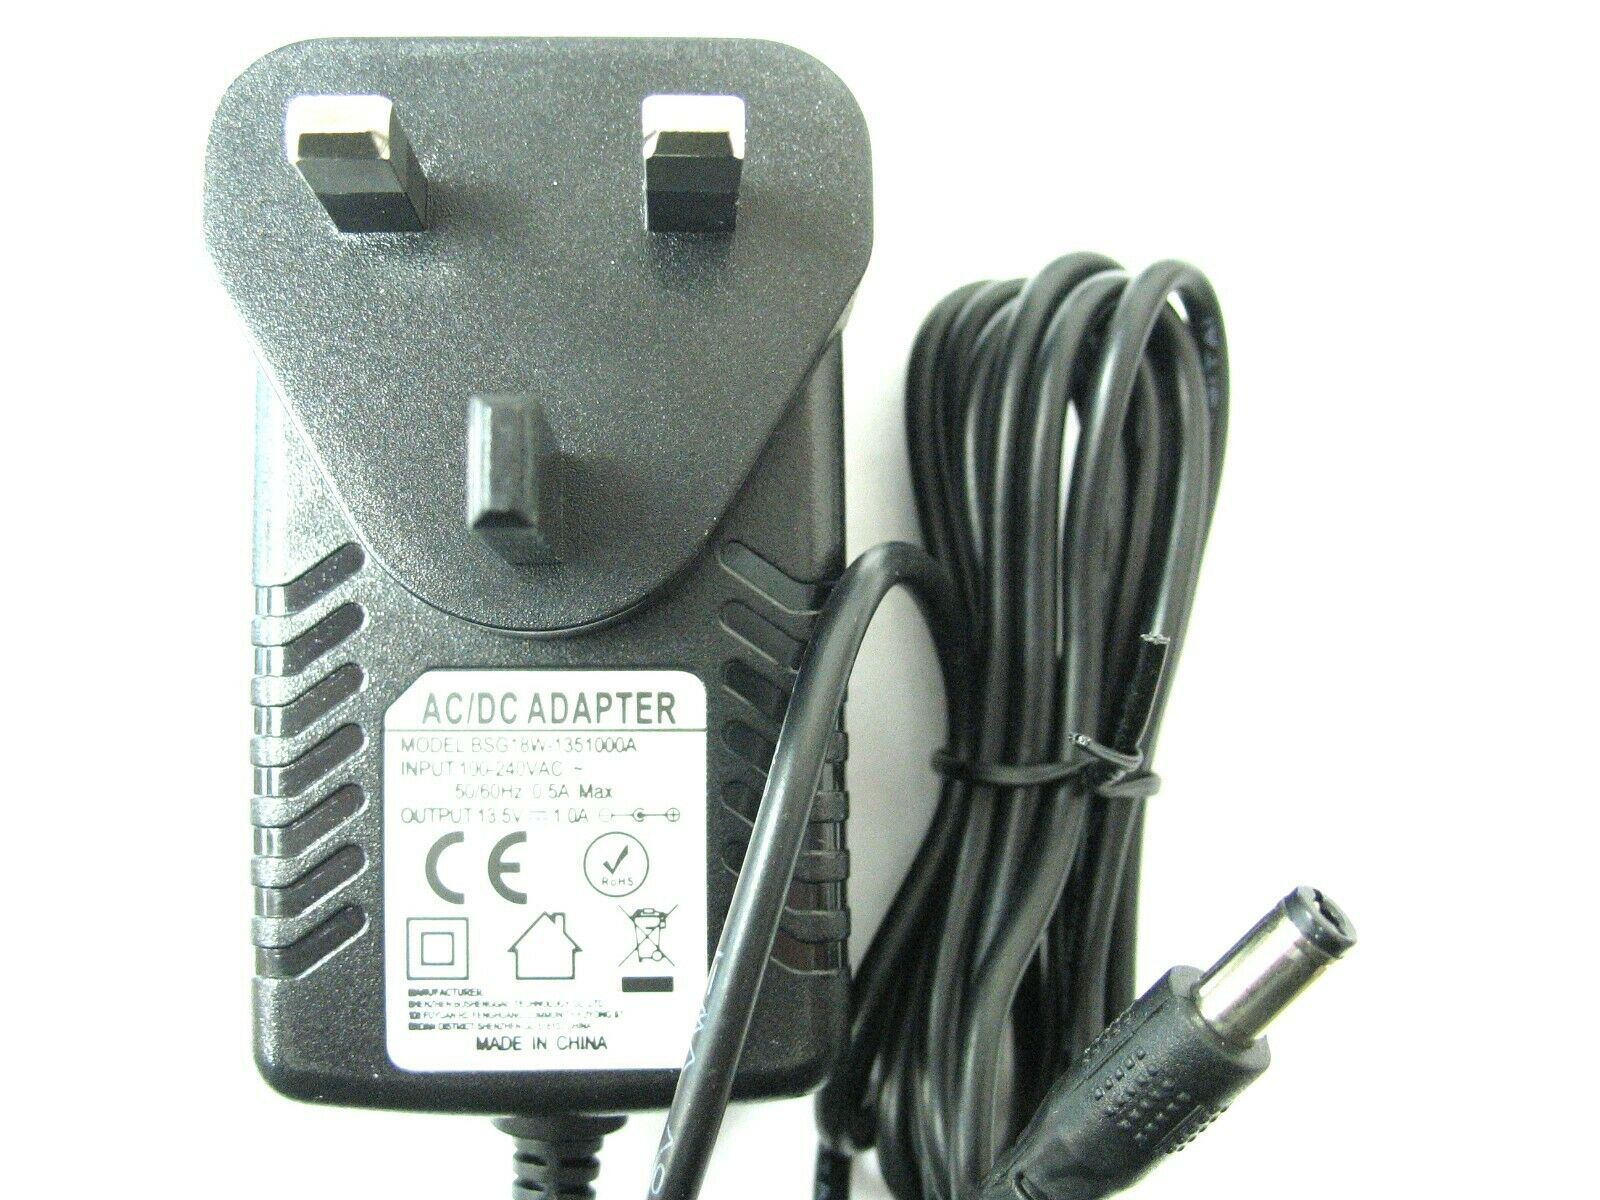 13.5V AC/DC HALFORDS POWERPACK 100/200 POWER ADAPTOR/SUPPLY/CHARGER L4D 1350 50R Type: Power Adaptor MPN: Does Not